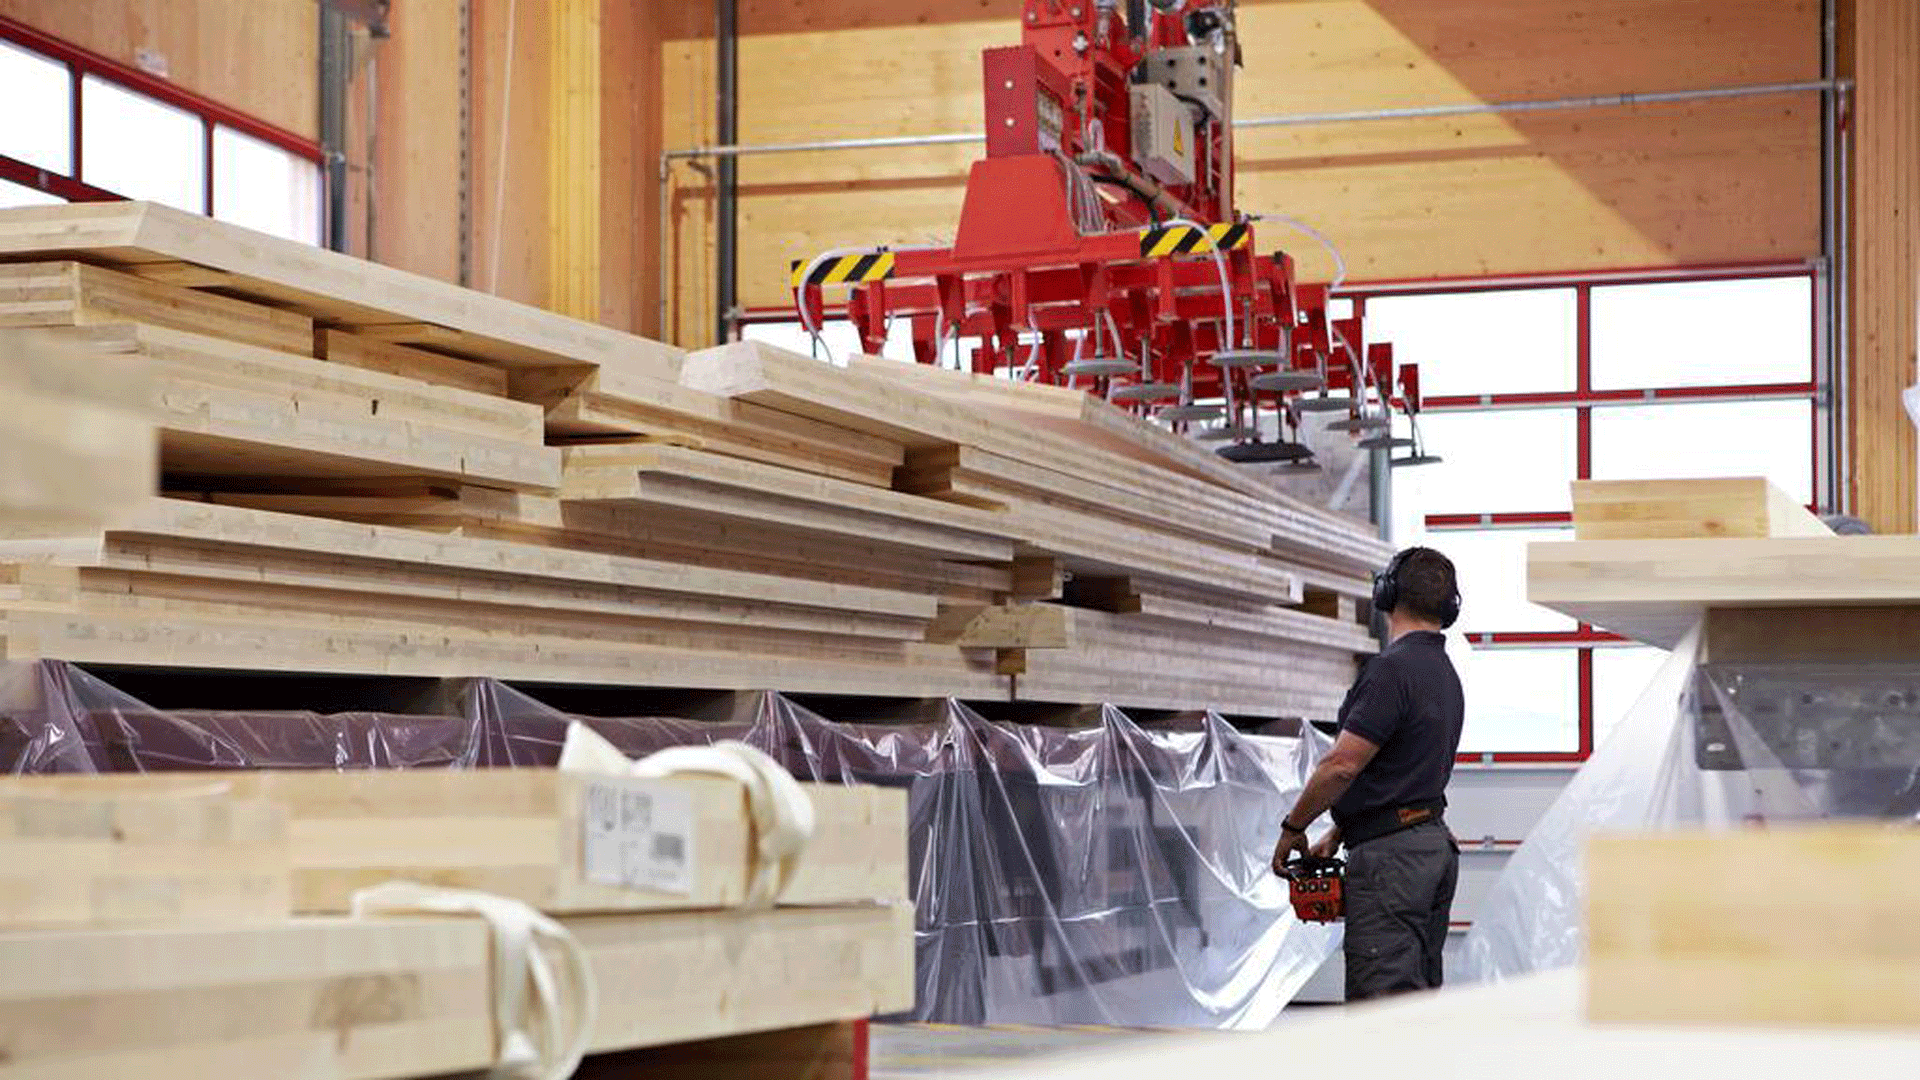 A man stand next to a machine with large slabs of wood.